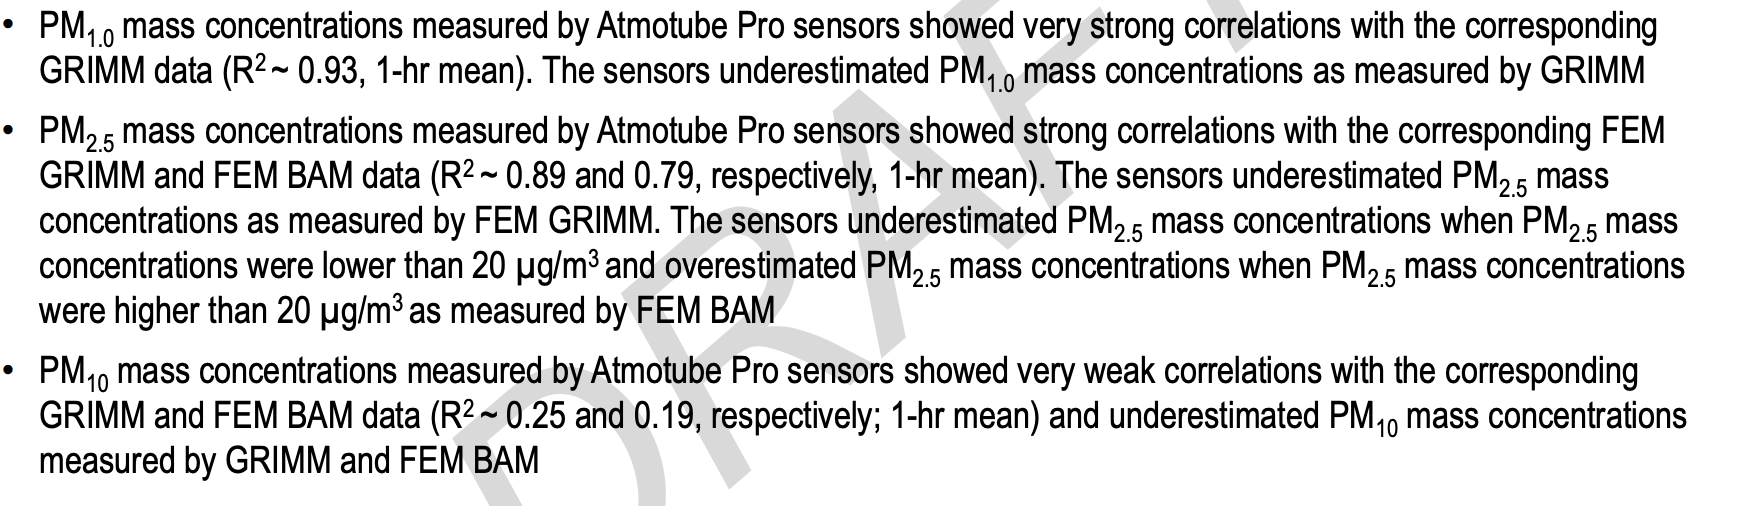 AQMD Atmotube Accuracy